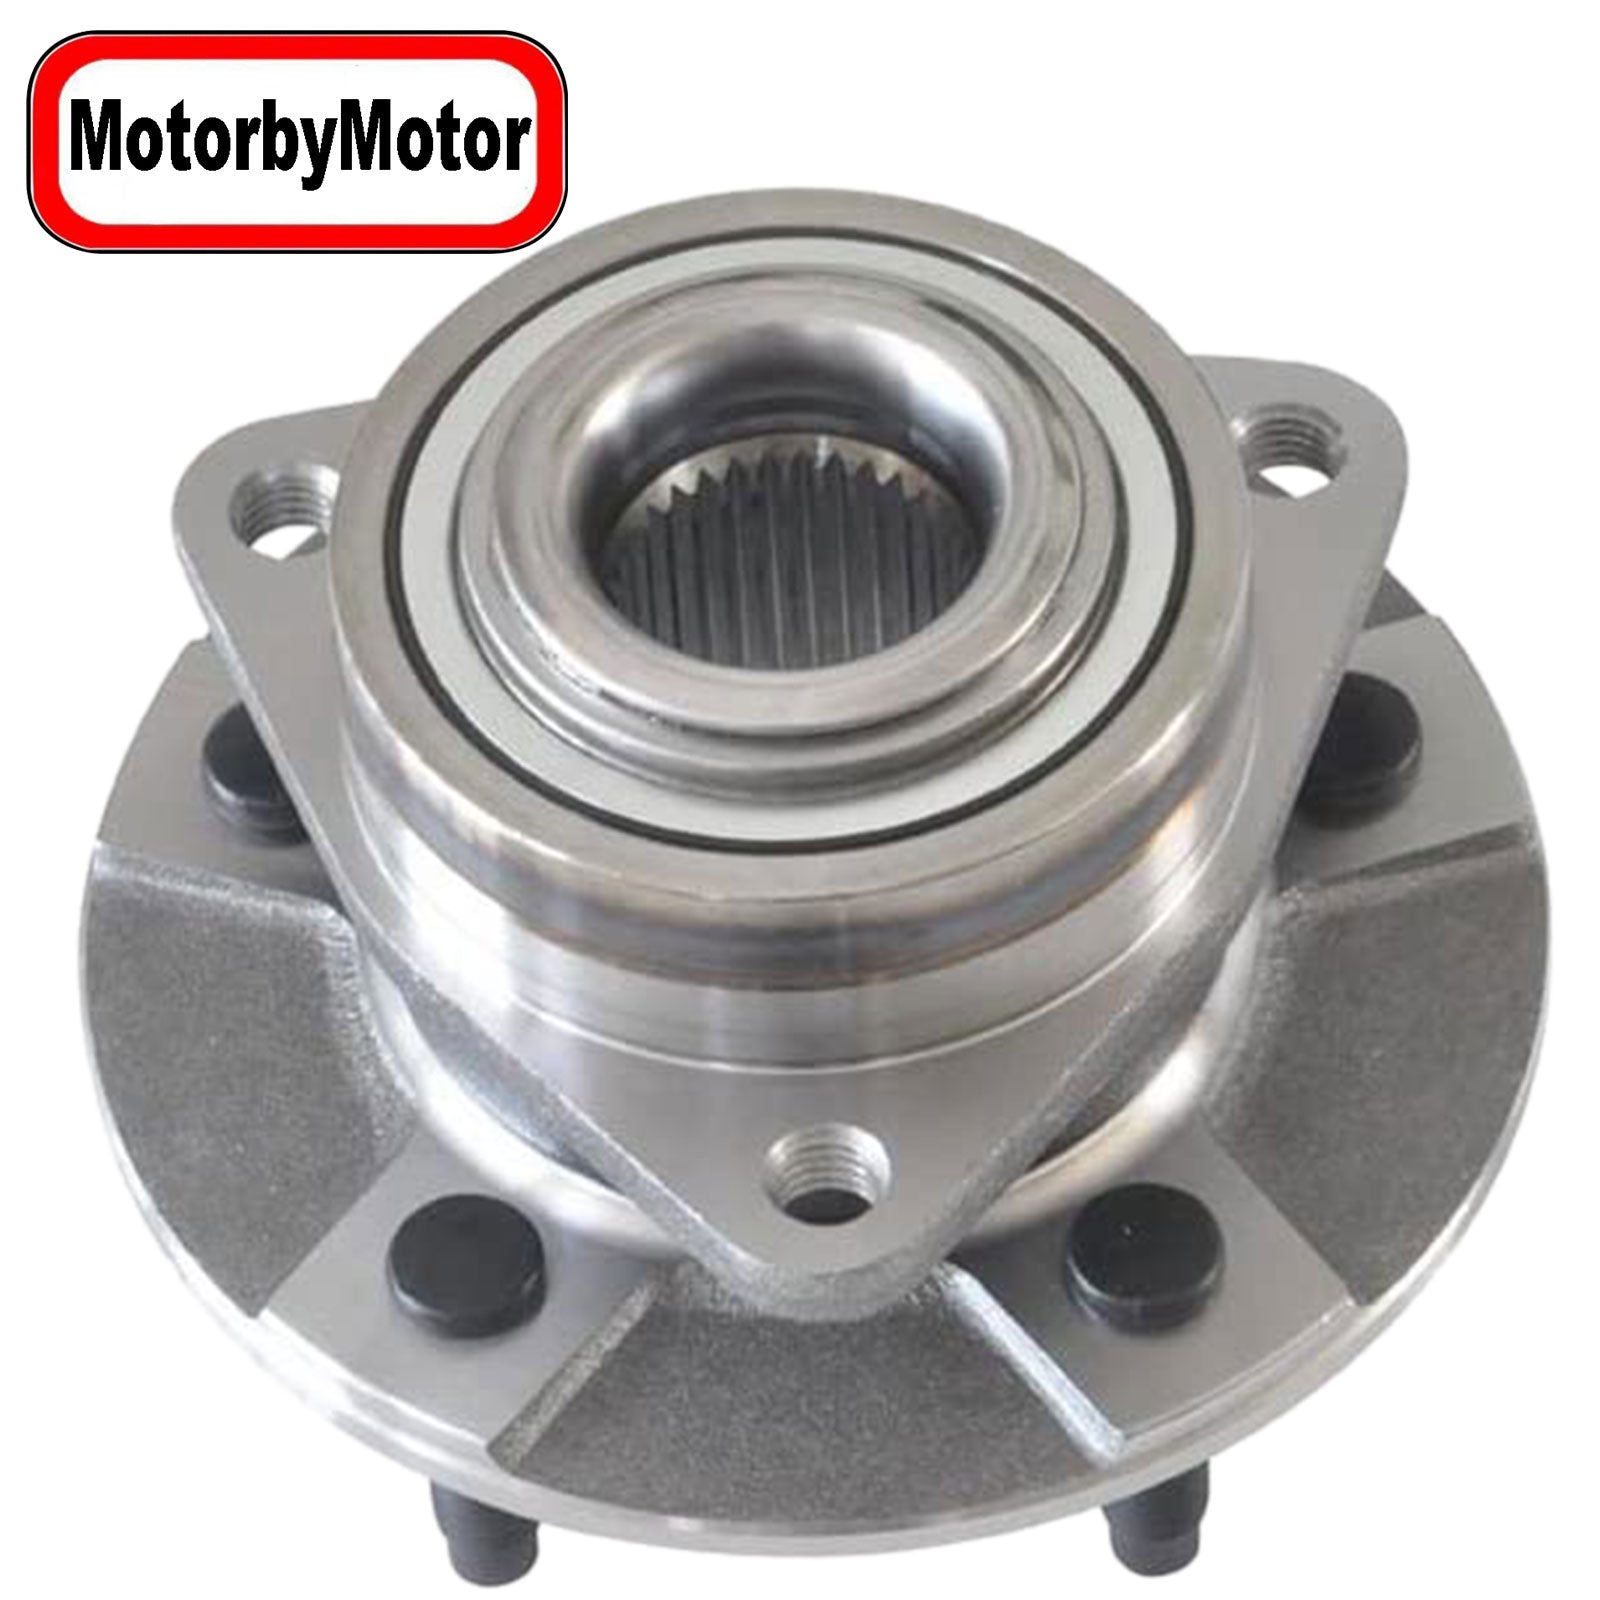 MotorbyMotor 513190 Front Wheel Bearing and Hub Assembly w/5 Lugs Fits for Chevy Equinox, Saturn Vue, Pontiac Torrent Low-Runout OE Directly Replacement Hub Bearing MotorbyMotor